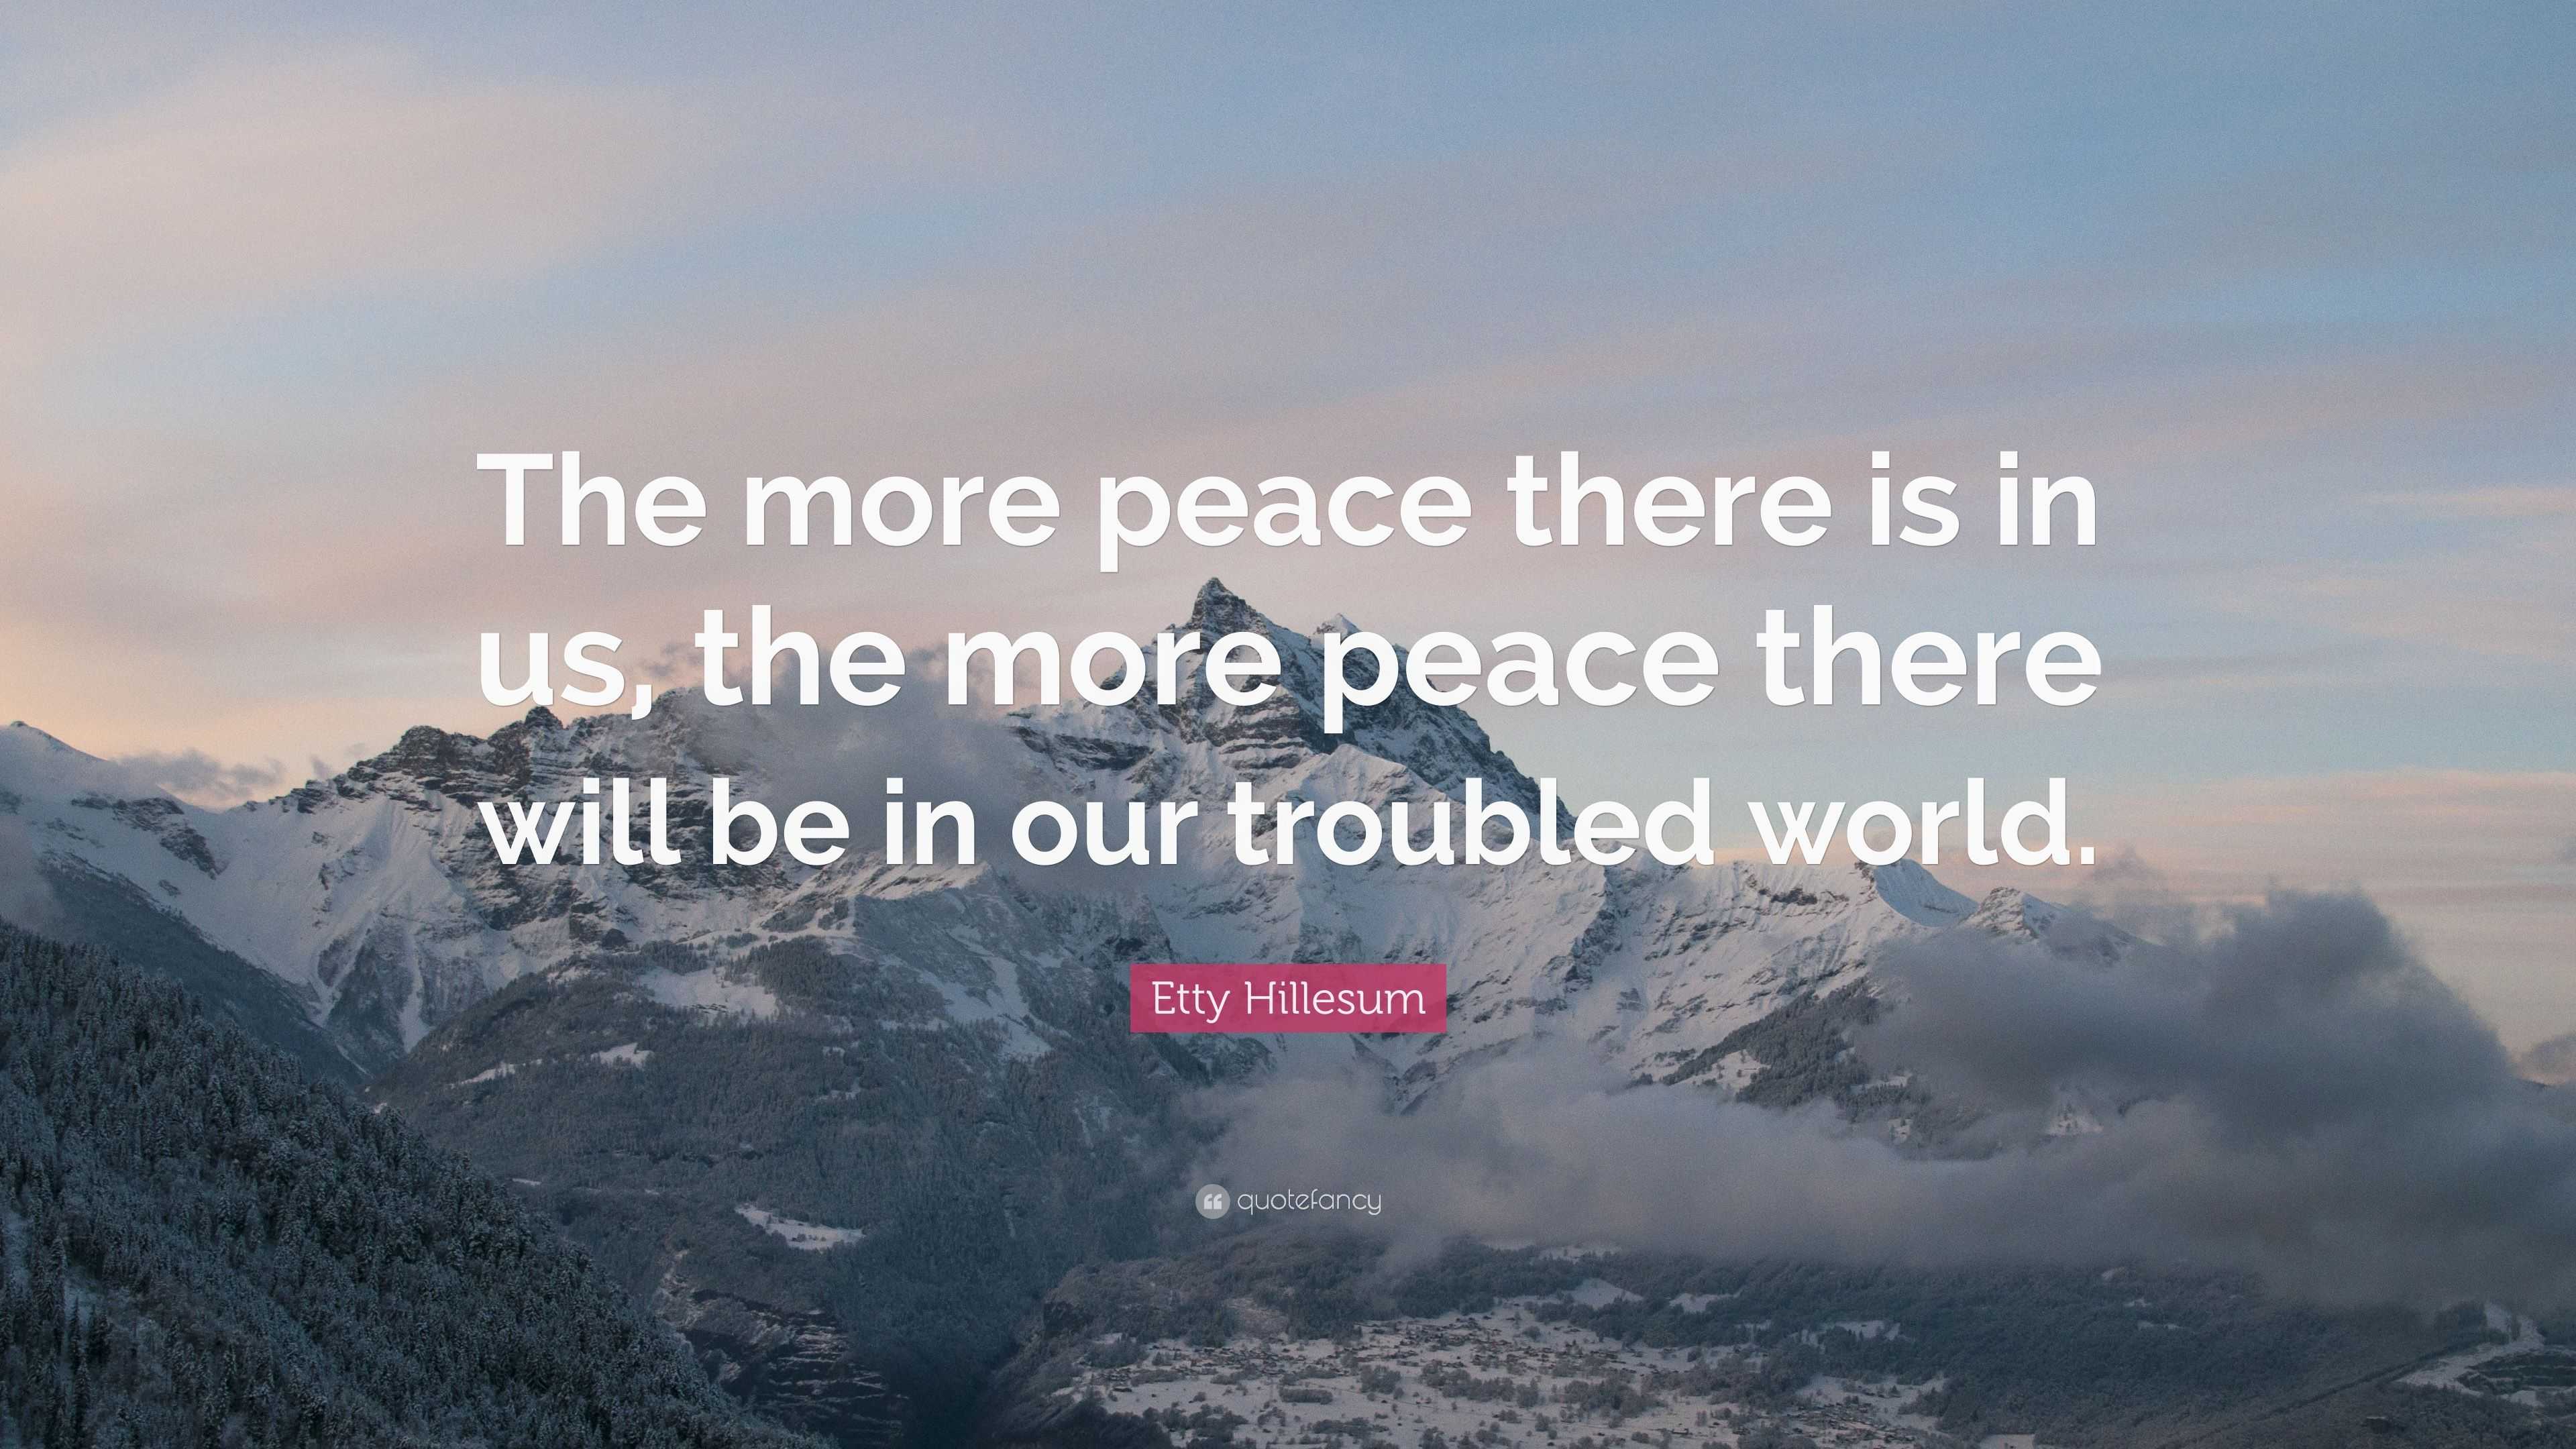 Etty Hillesum Quote: “The more peace there is in us, the more peace ...